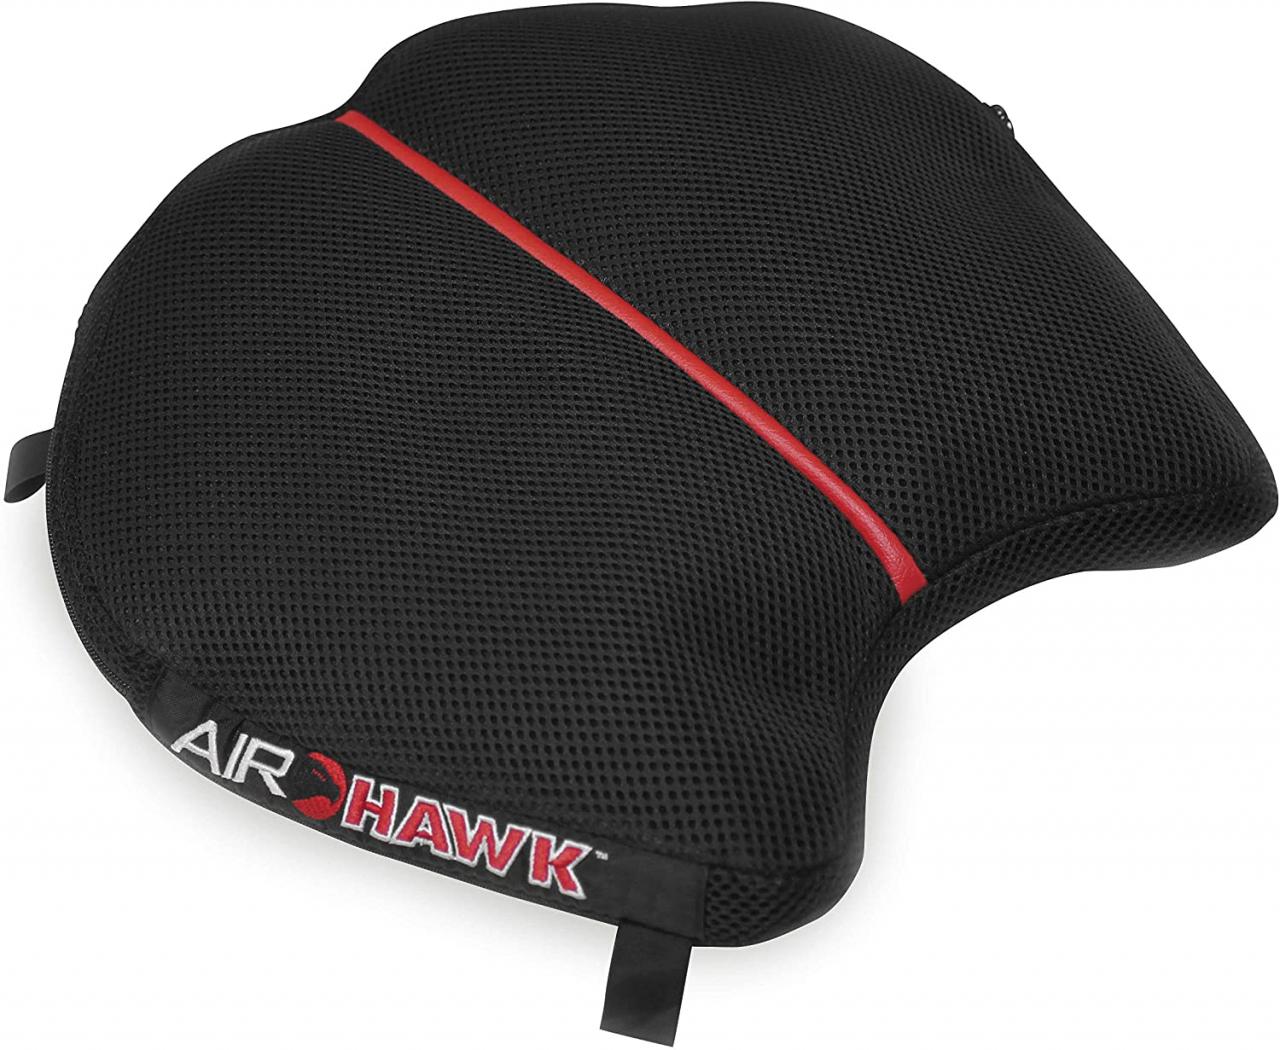 Airhawk R Cruiser Seat Pad Review; Extend Your Ride, Save Your Butt |  Motorcycle Touring Tips